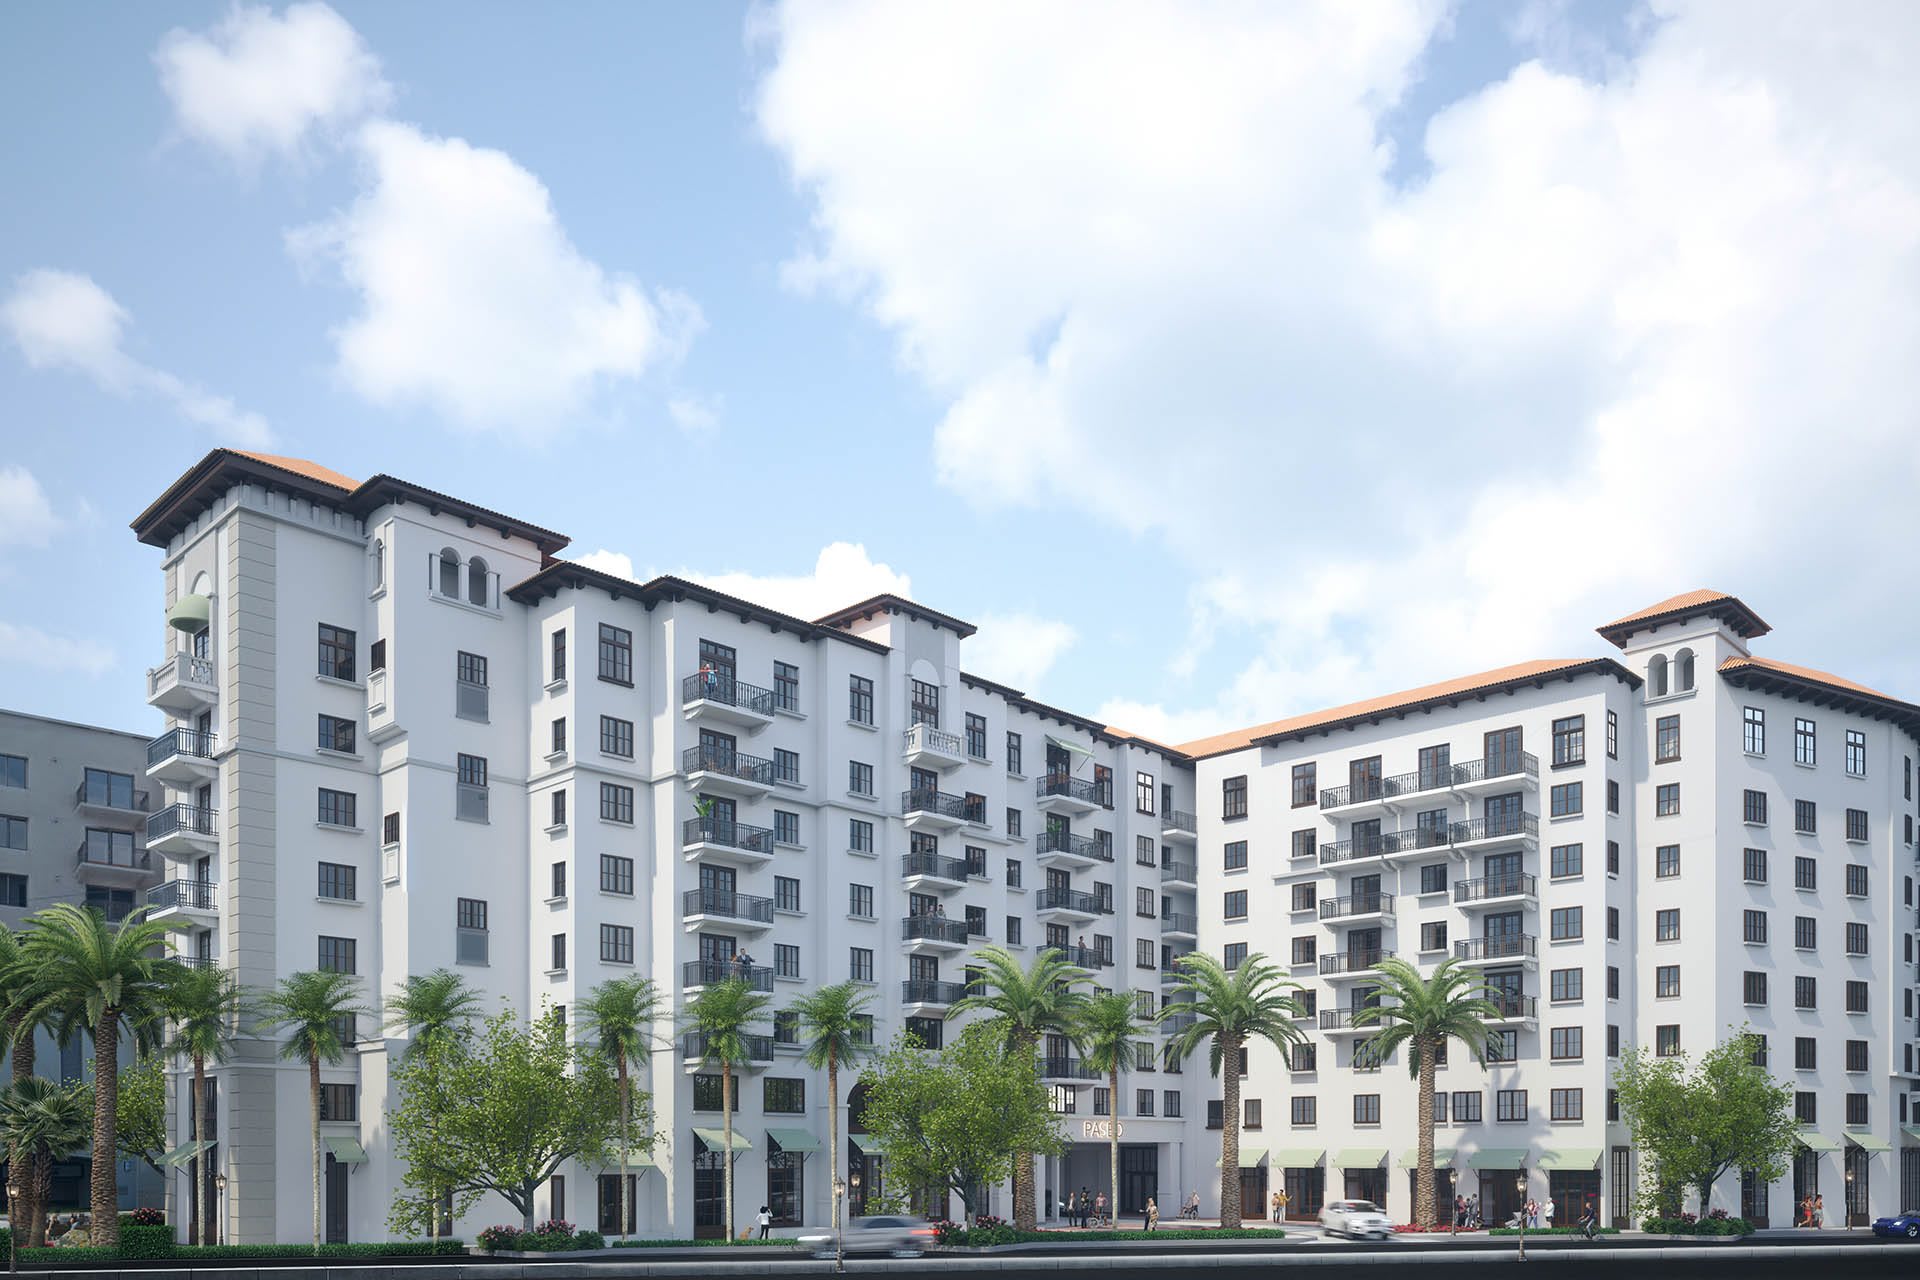 The Watermark at Coral Gables (Opening Early 2023) community exterior